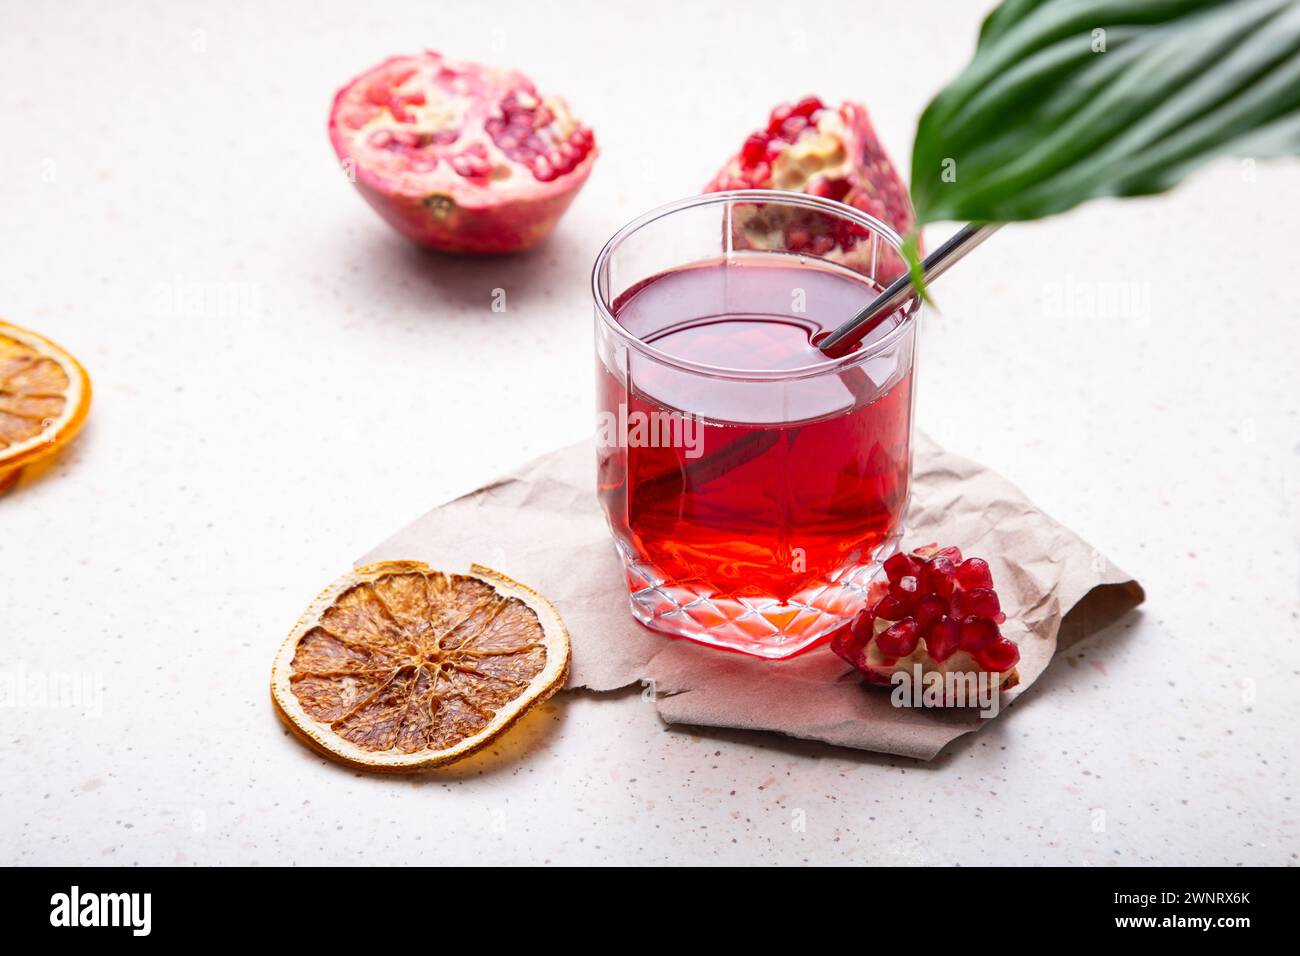 Health in Glass - Pomegranate Juice with Rustic Charm. Stock Photo